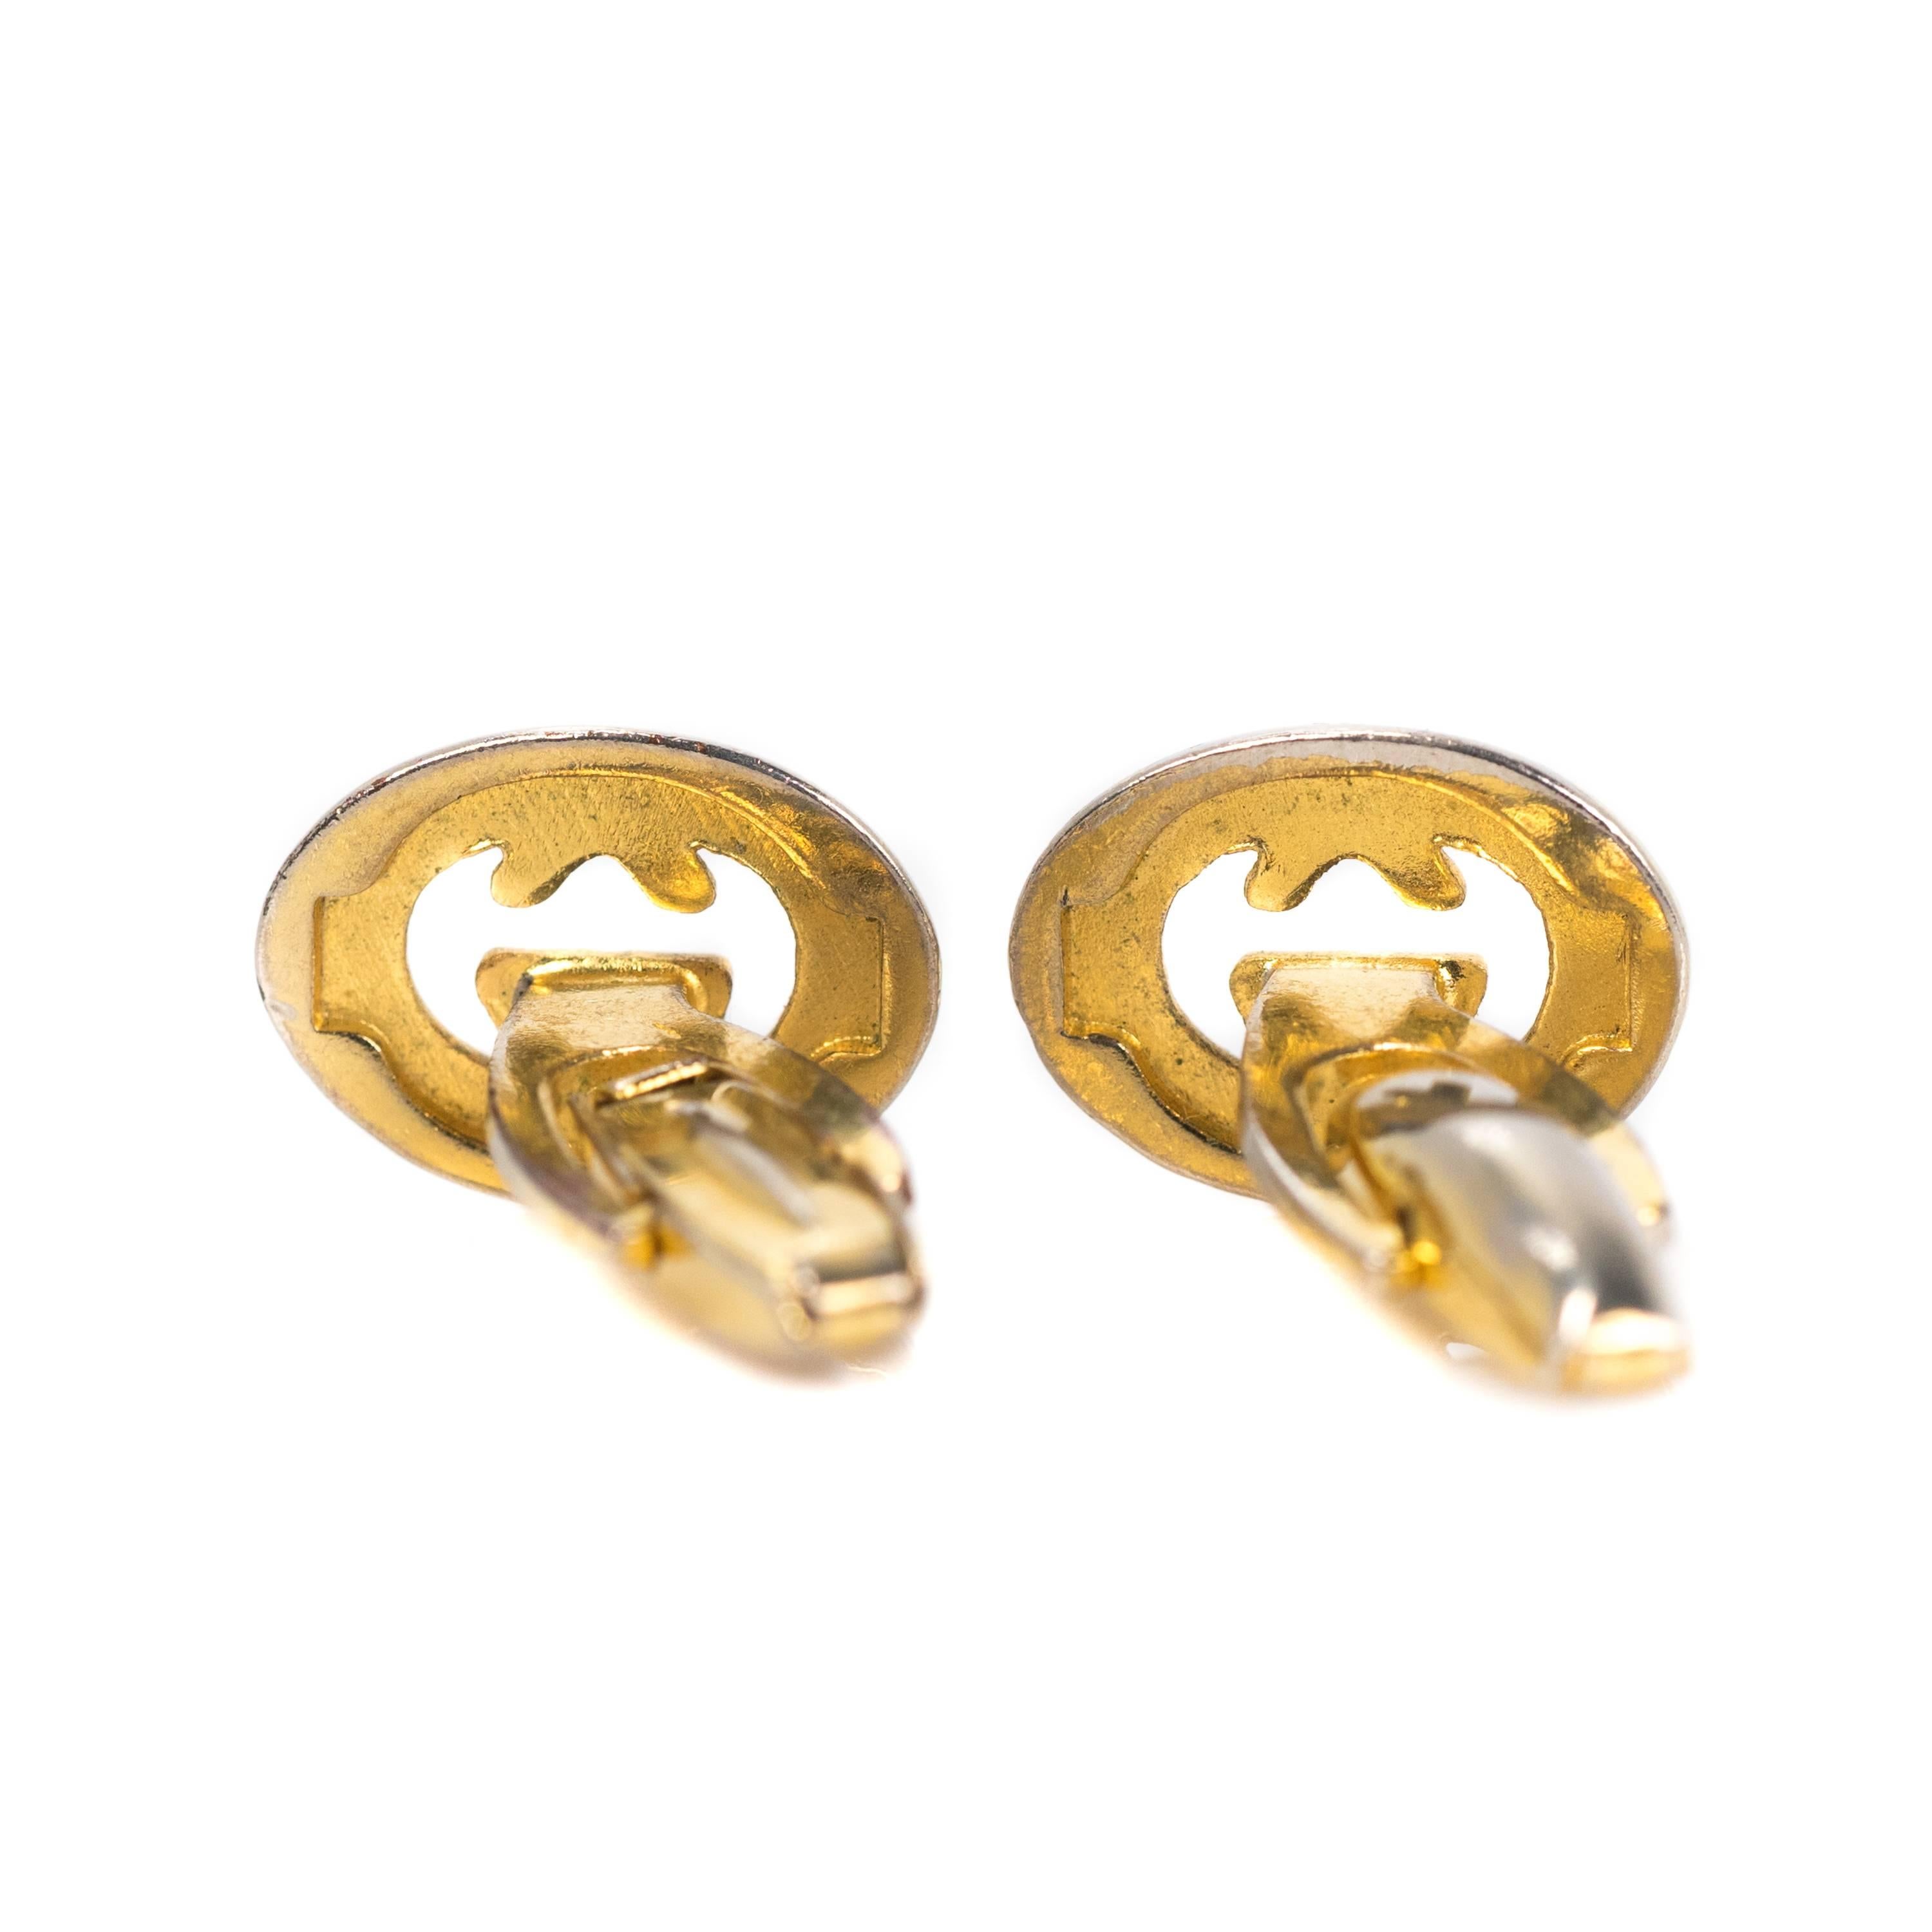 1960s Gucci Two Tone, Bullet Back Cufflinks 

Features the iconic Gucci logo in two tone metal.
Interlocking silver letters G are framed by an oval of gold within a silver border. The inner edges of the letters G and the backs of the cufflinks are